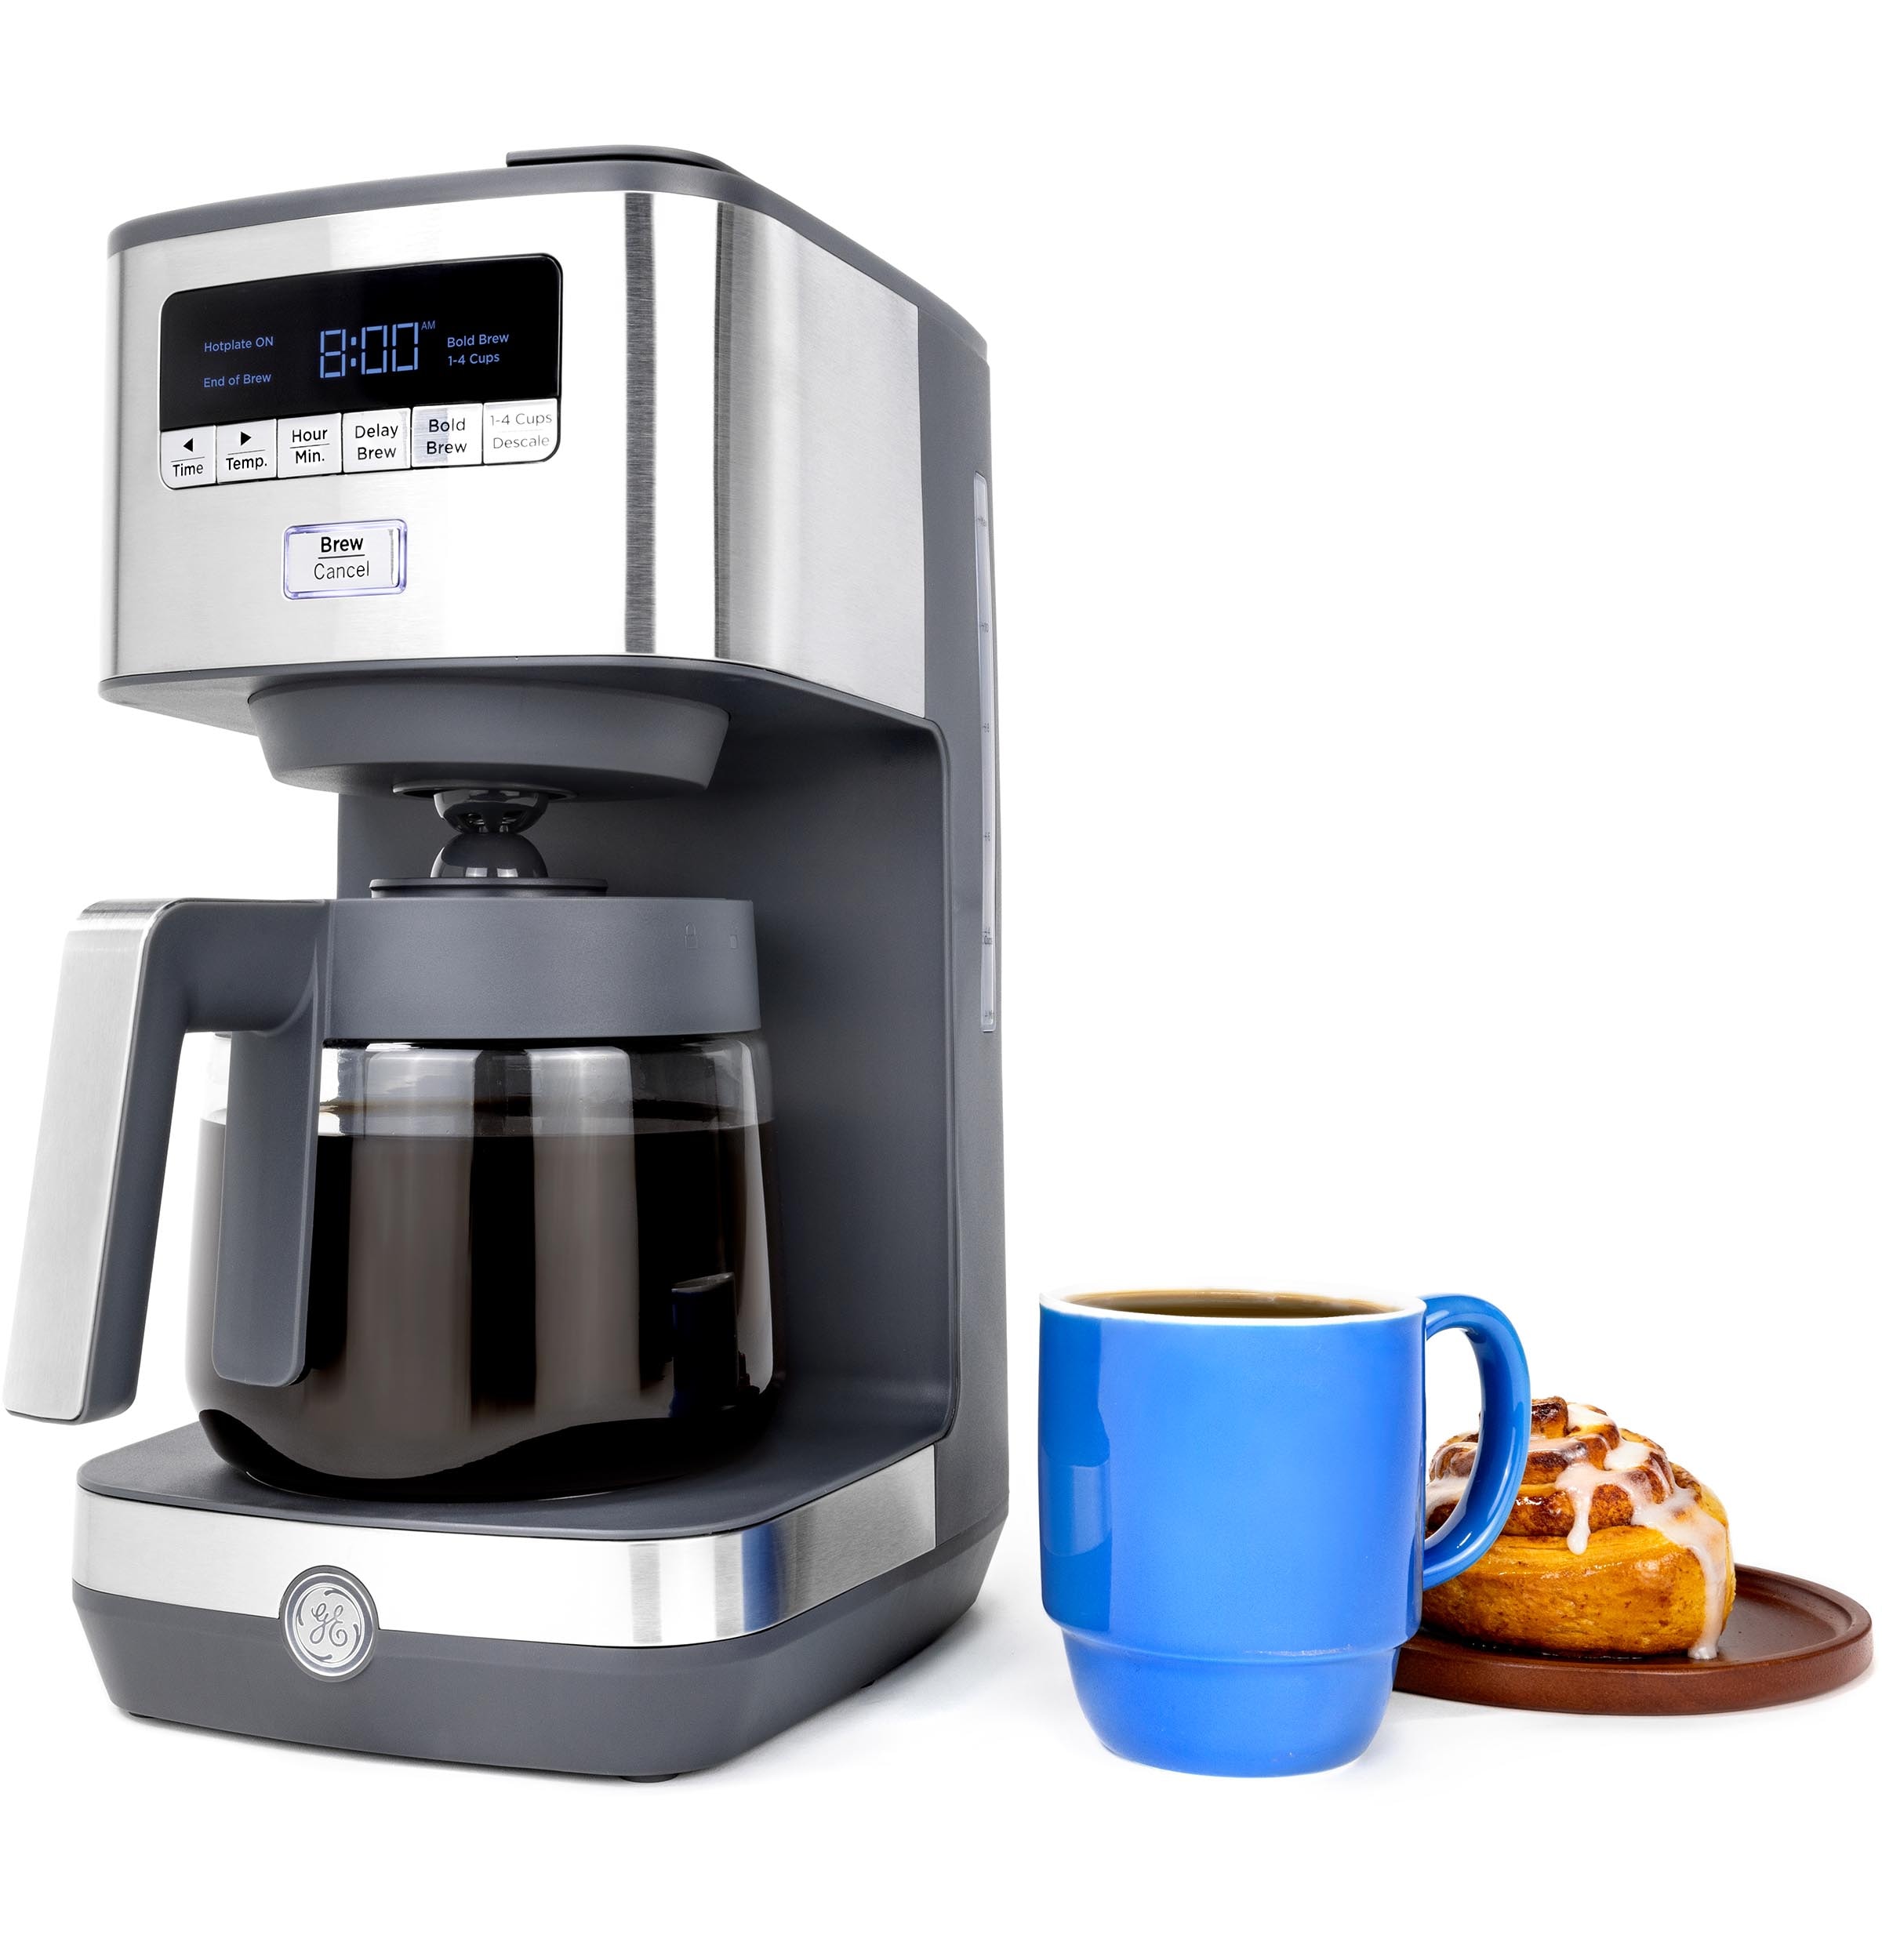  Hamilton Beach The Scoop Single Serve Coffee Maker & Fast Grounds  Brewer for 8-14oz. Cups, Brews in Minutes, 40oz. Removable Reservoir,  Stainless Steel (49987),Silver: Home & Kitchen